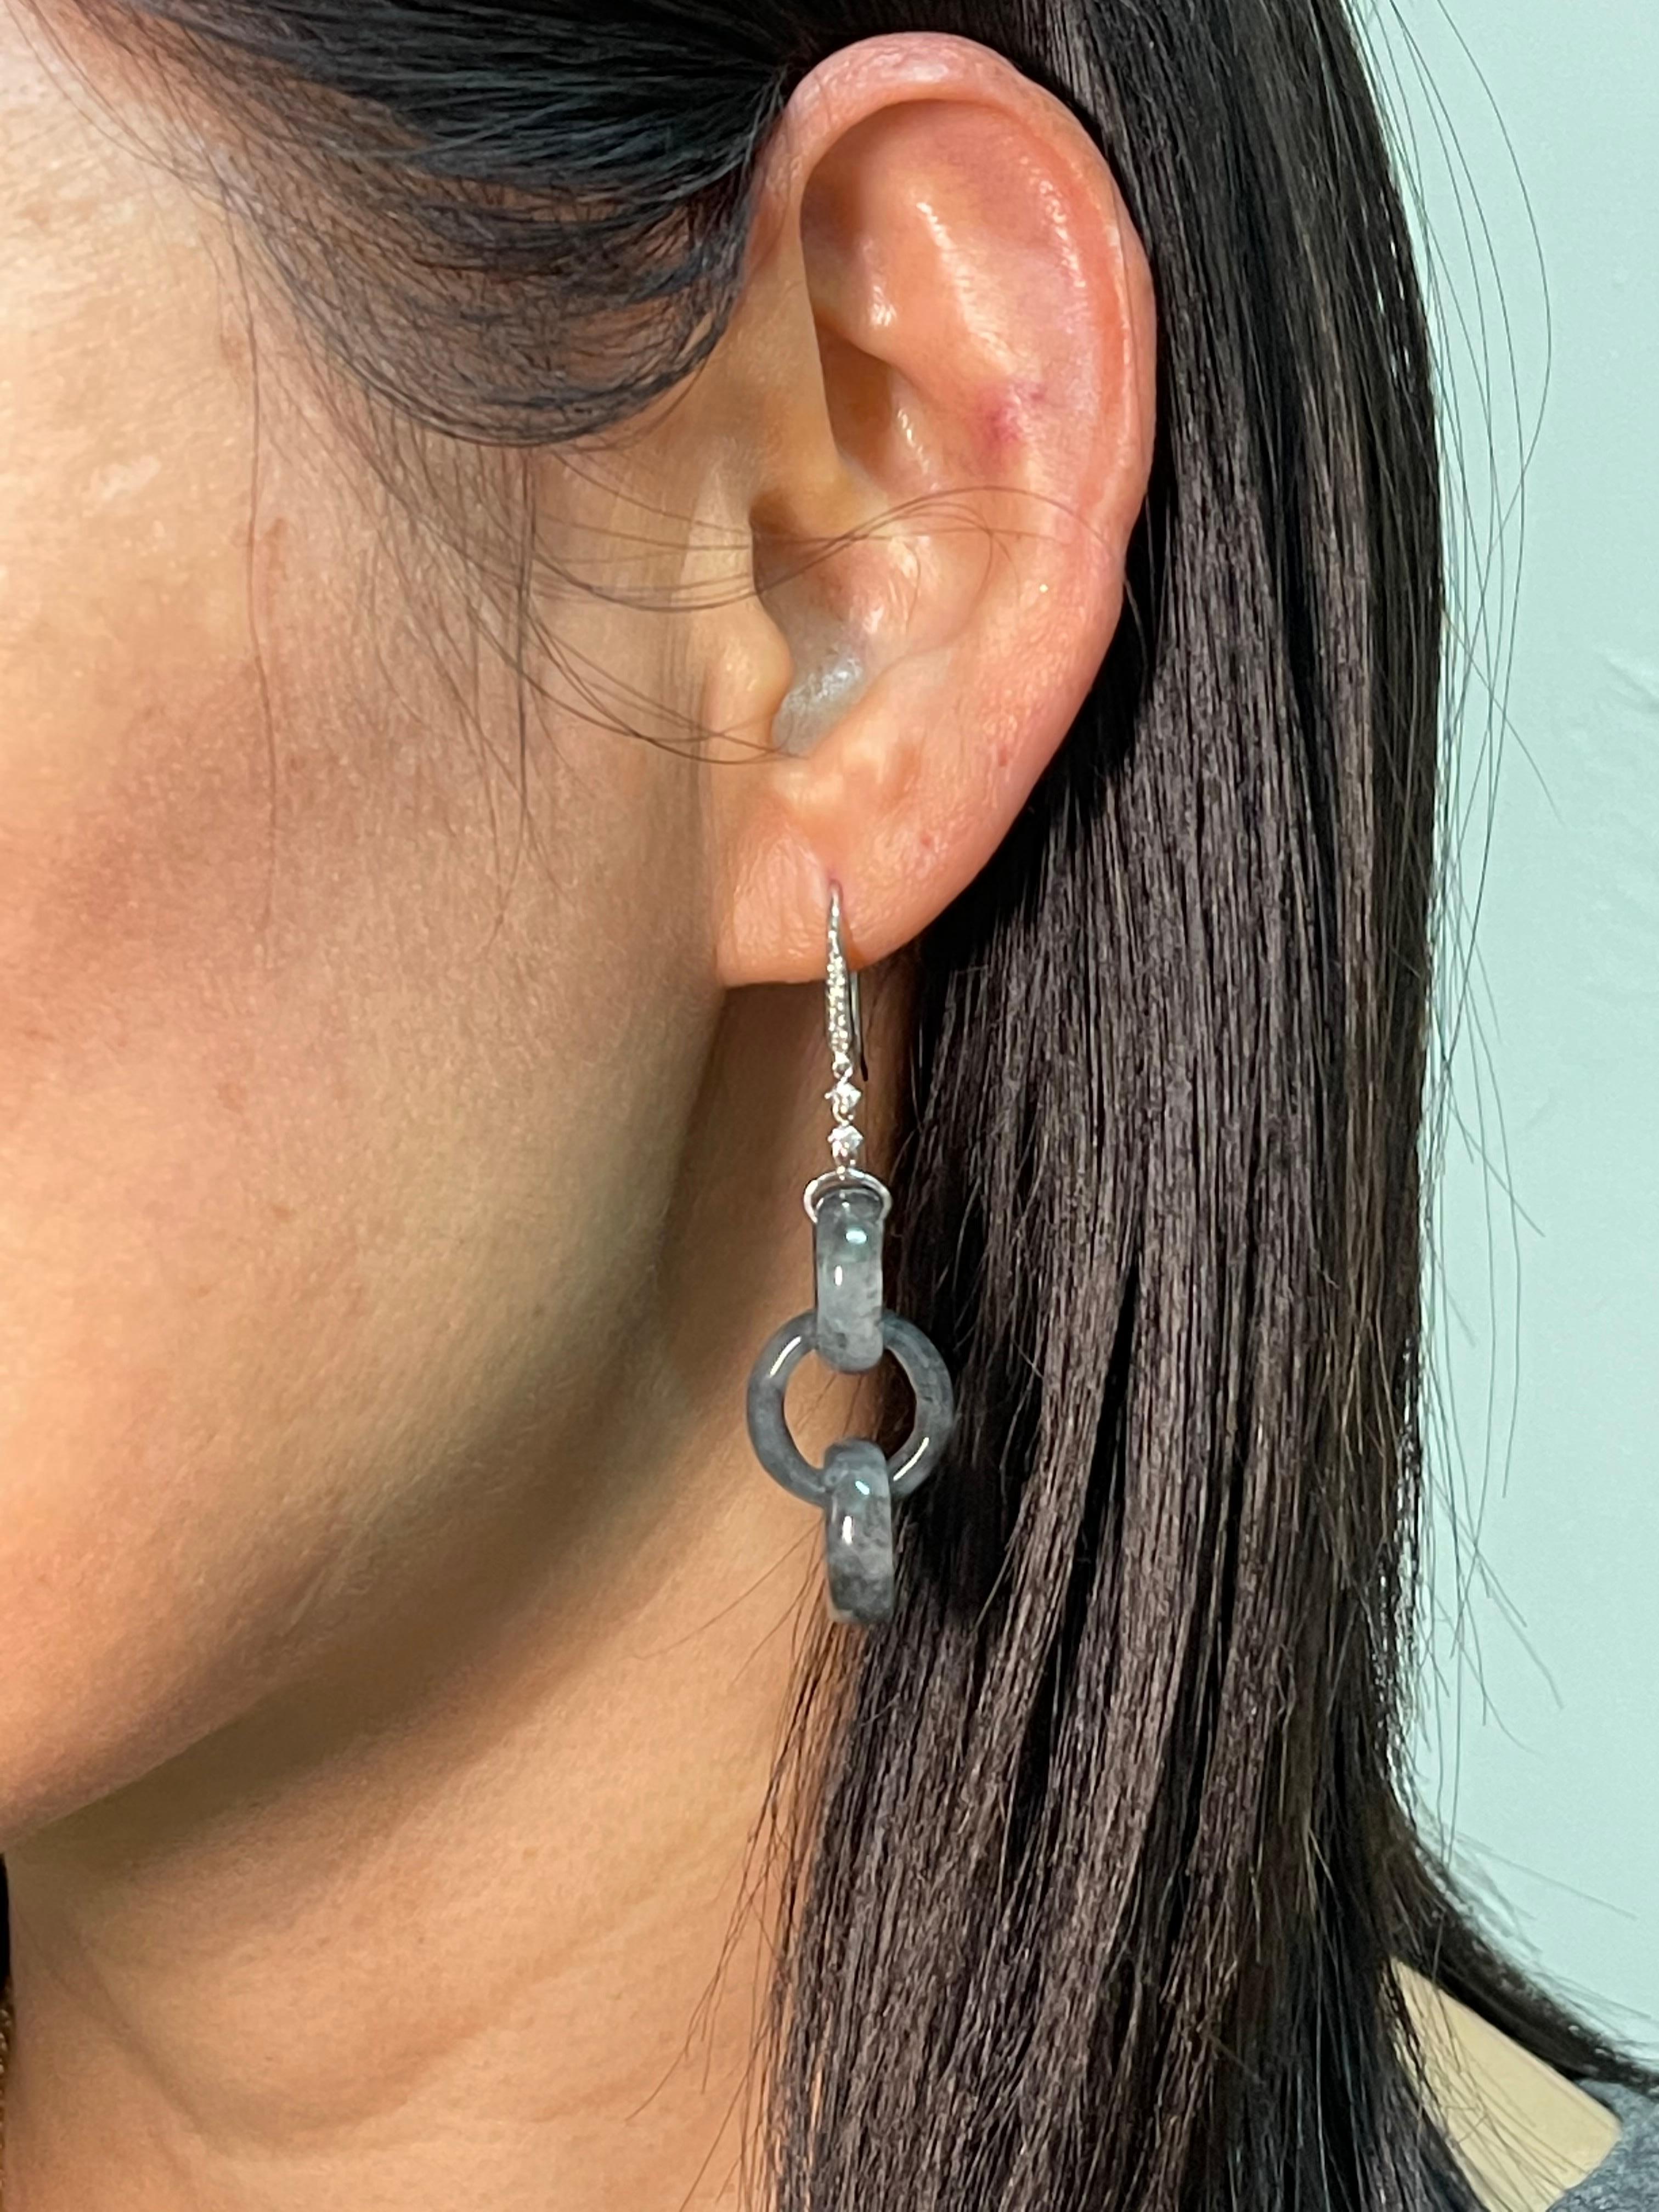 Please check out the HD video! The perfect icy black jade. Here is a pair of natural Icy black Jadeite Jade earrings that are extremely difficult to make. Three solid interlocking links carved out of one block of jadeite material. Icy black jade of